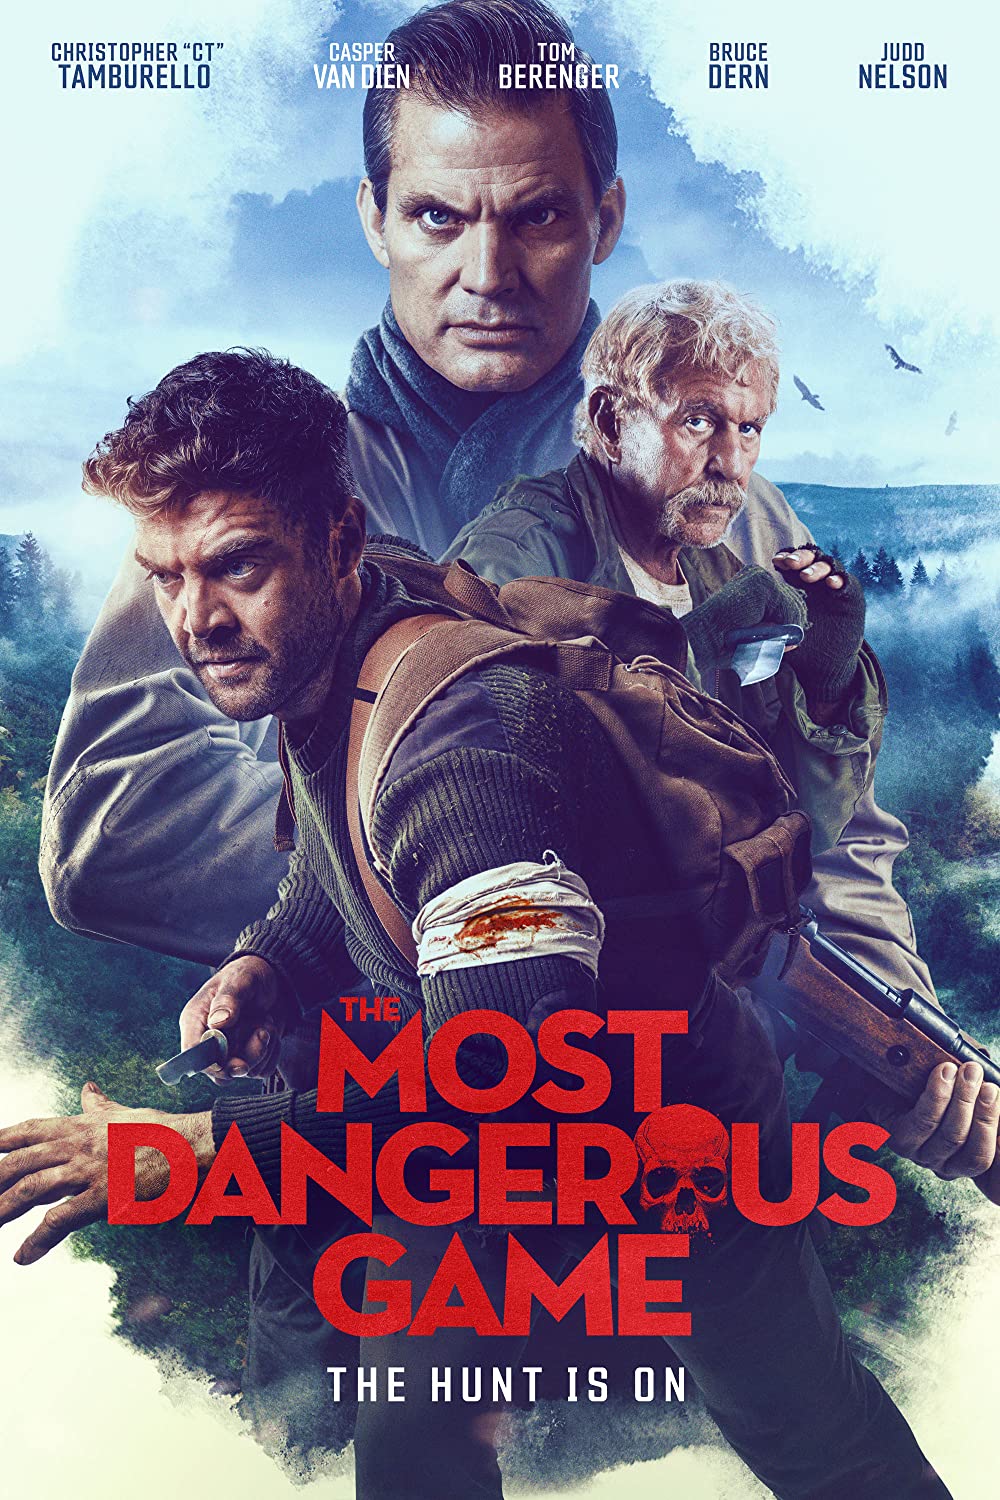 The Most Dangerous Game 2022 English 480p HDRip ESub 300MB Download